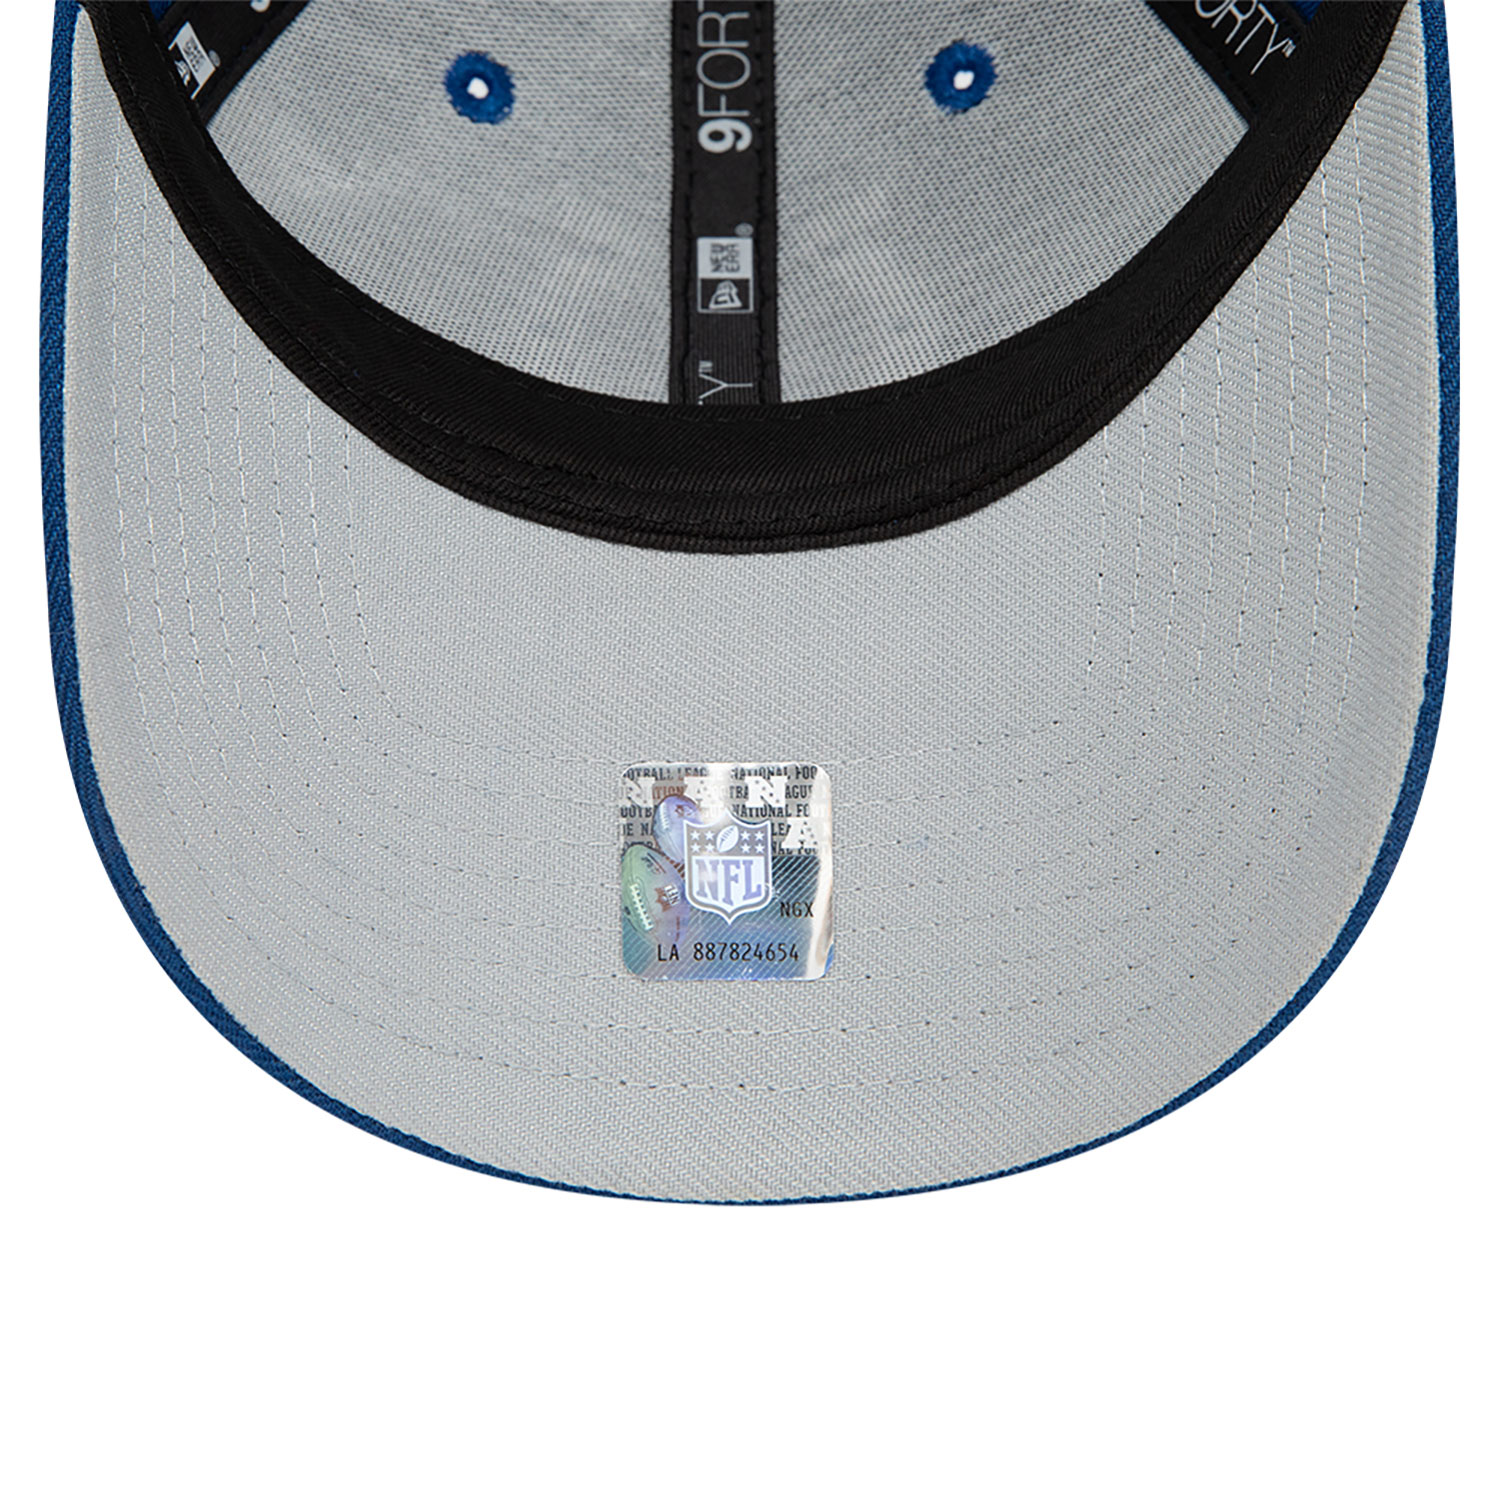 Indianapolis Colts The League Blue 9FORTY Adjustable Cap